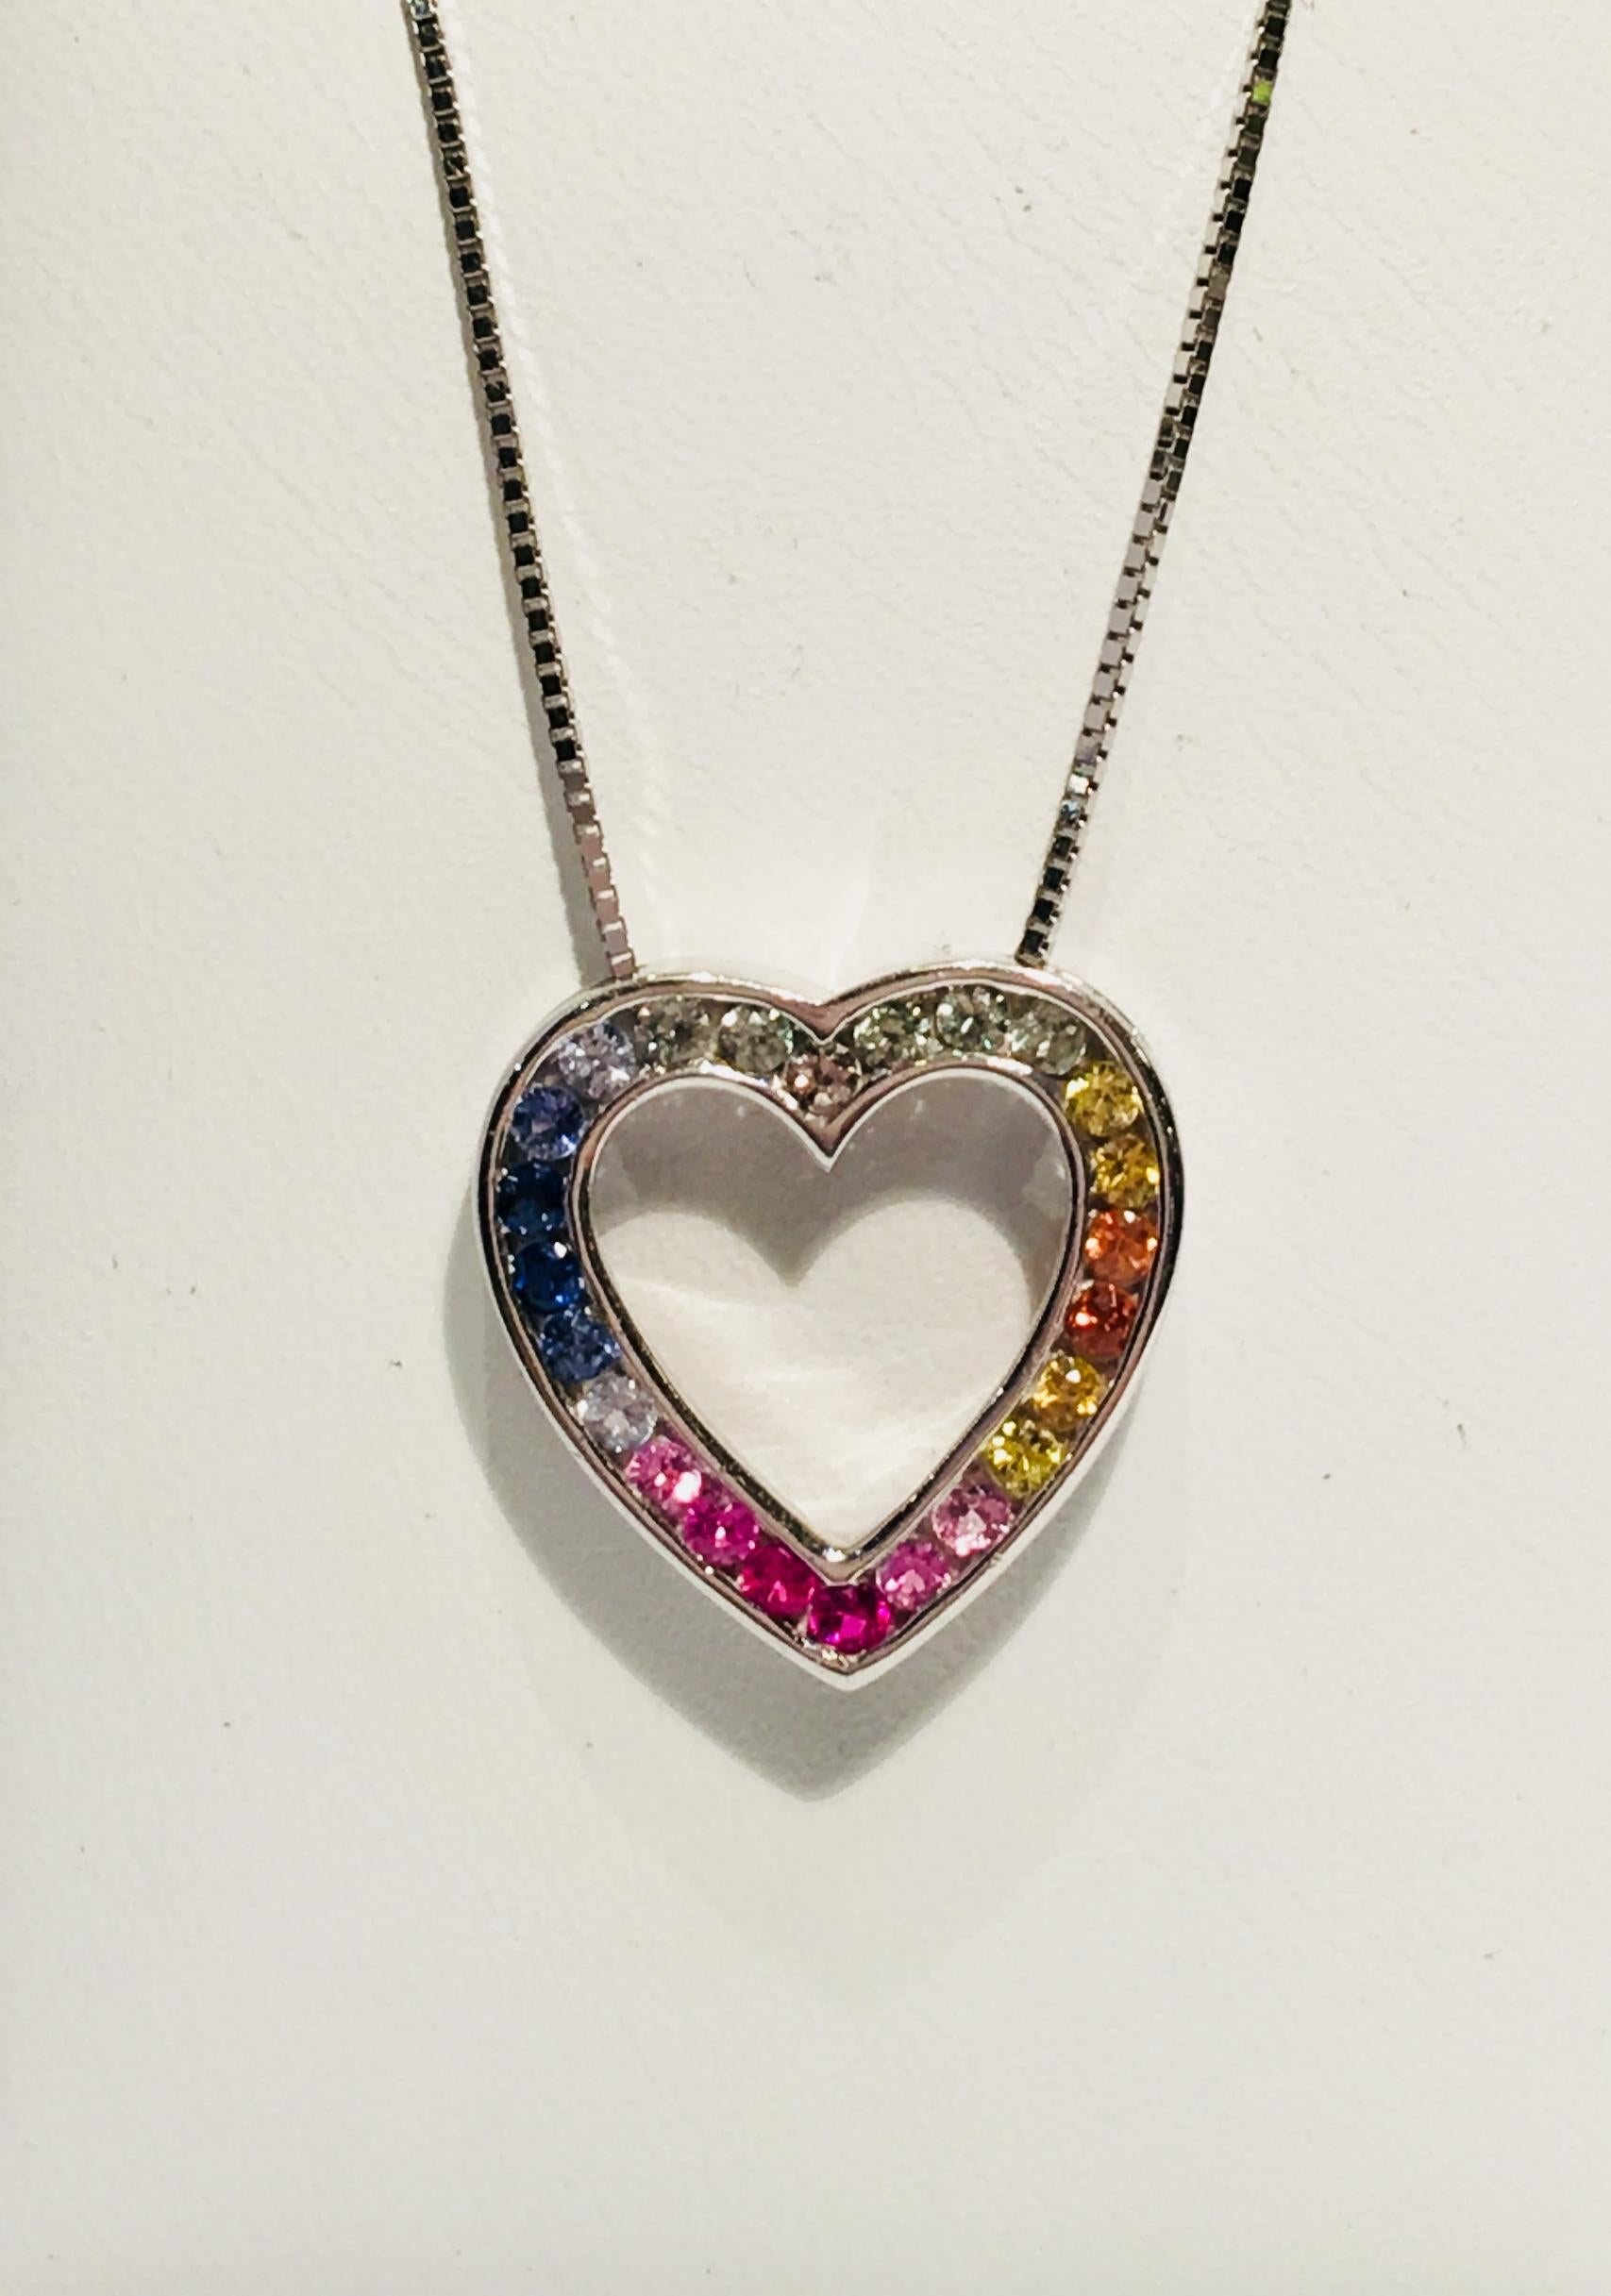 Sweet heart shaped 14 karat white gold pendant features 24 channel set round sapphires in colors of white, yellow, orange, light pink, dark pink, light blue and dark blue, creating a rainbow effect.

Sapphires measure 1.85 mm in diameter and weigh